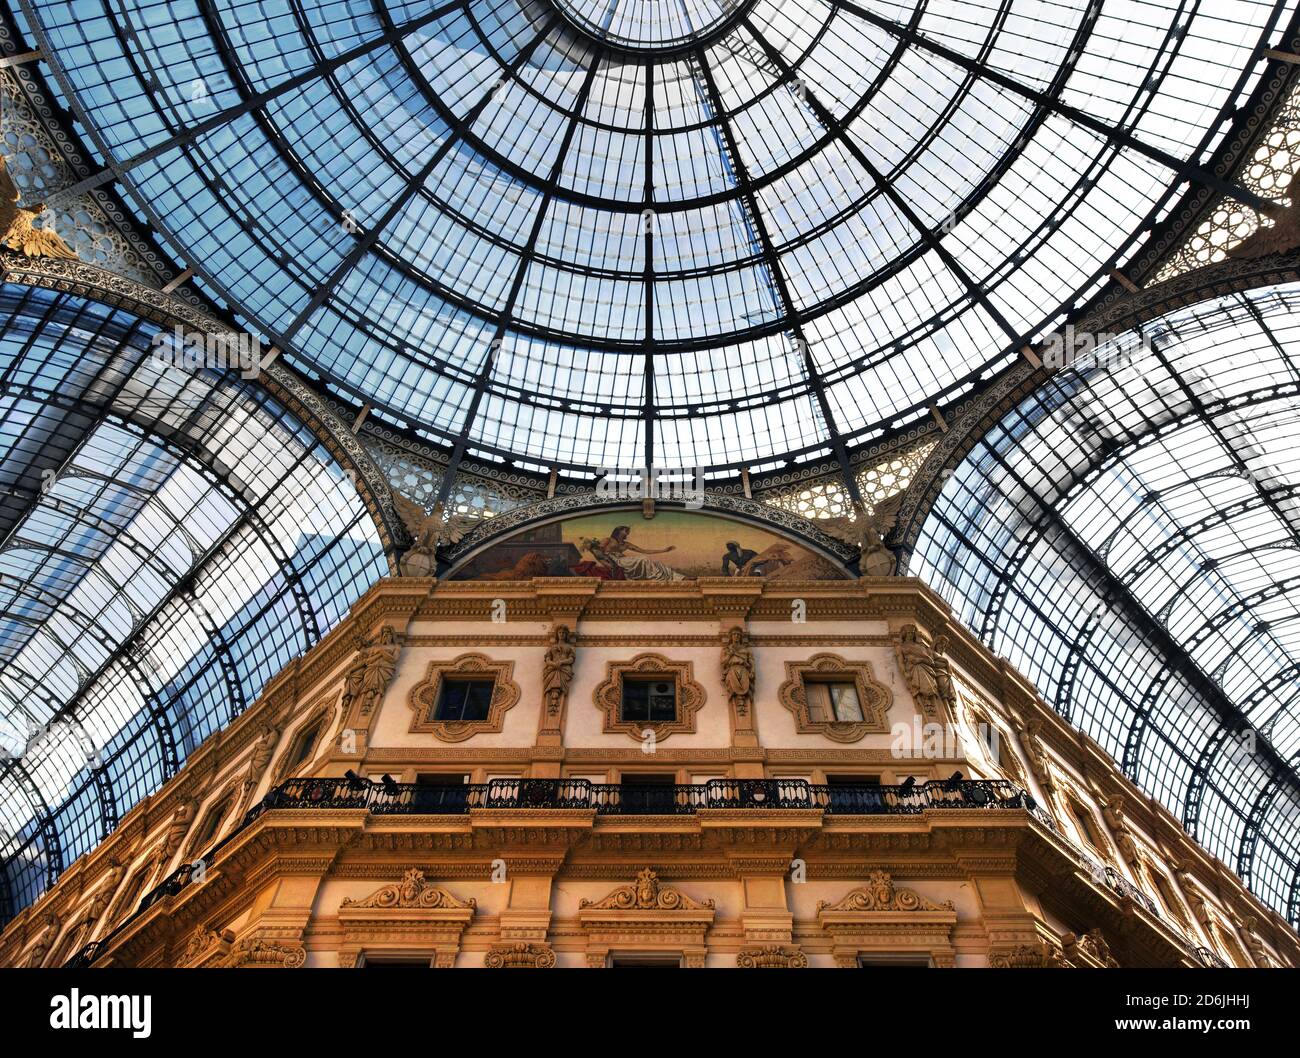 The glass dome of Galleria Vittorio Emanuele II, in central Milan, Italy Stock Photo